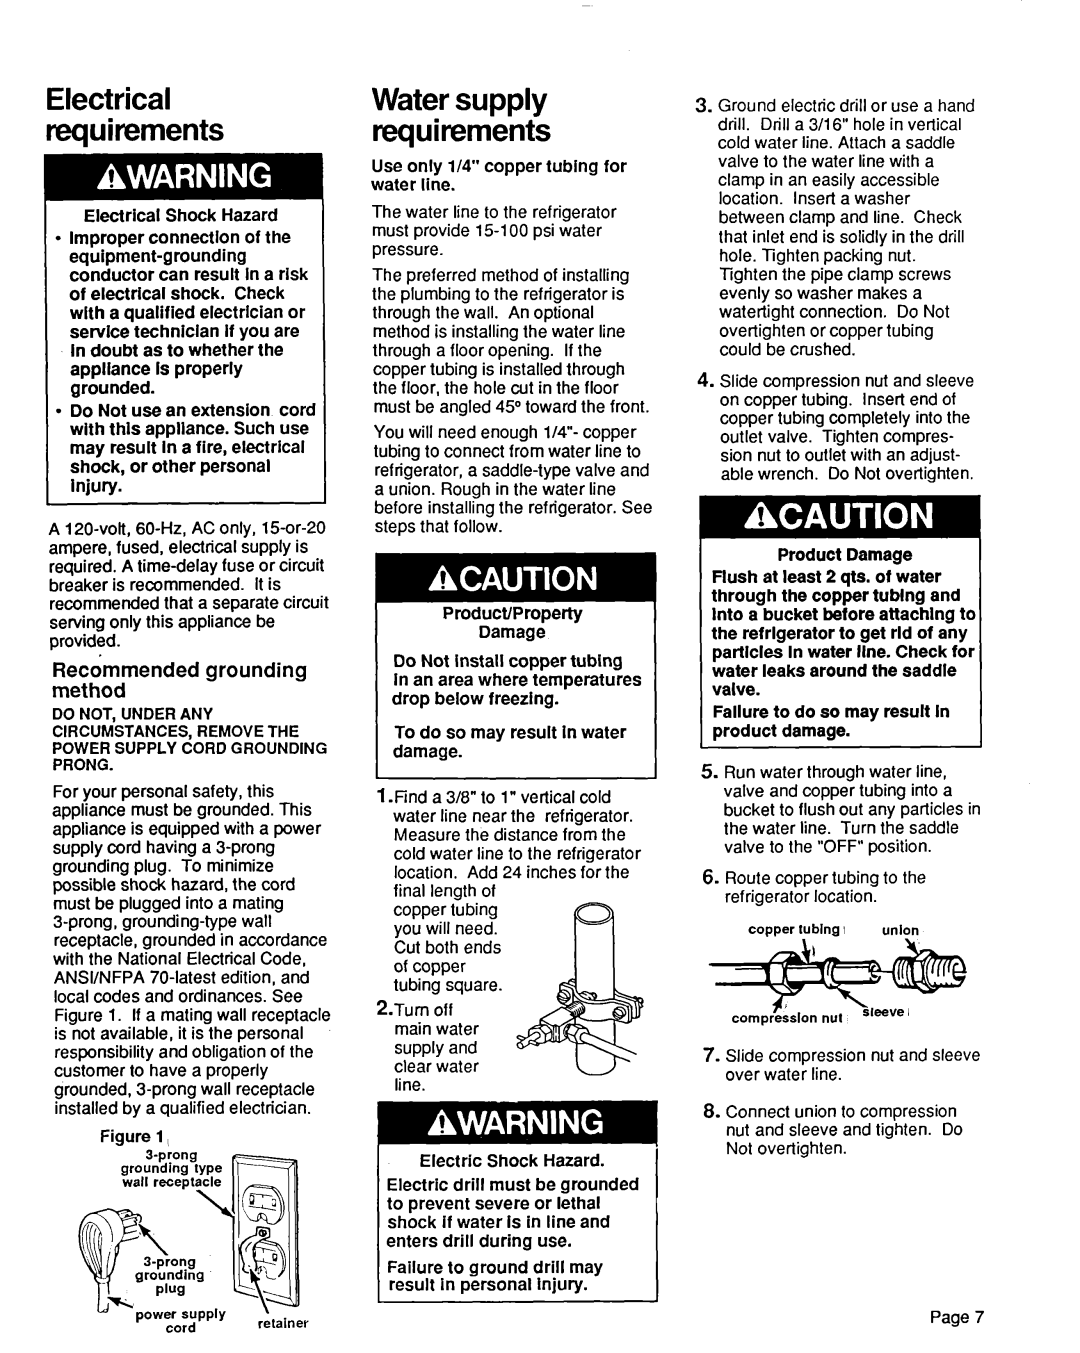 KitchenAid 2000491 Recommended grounding met hod, Electrical requirements, Water supply requirements 